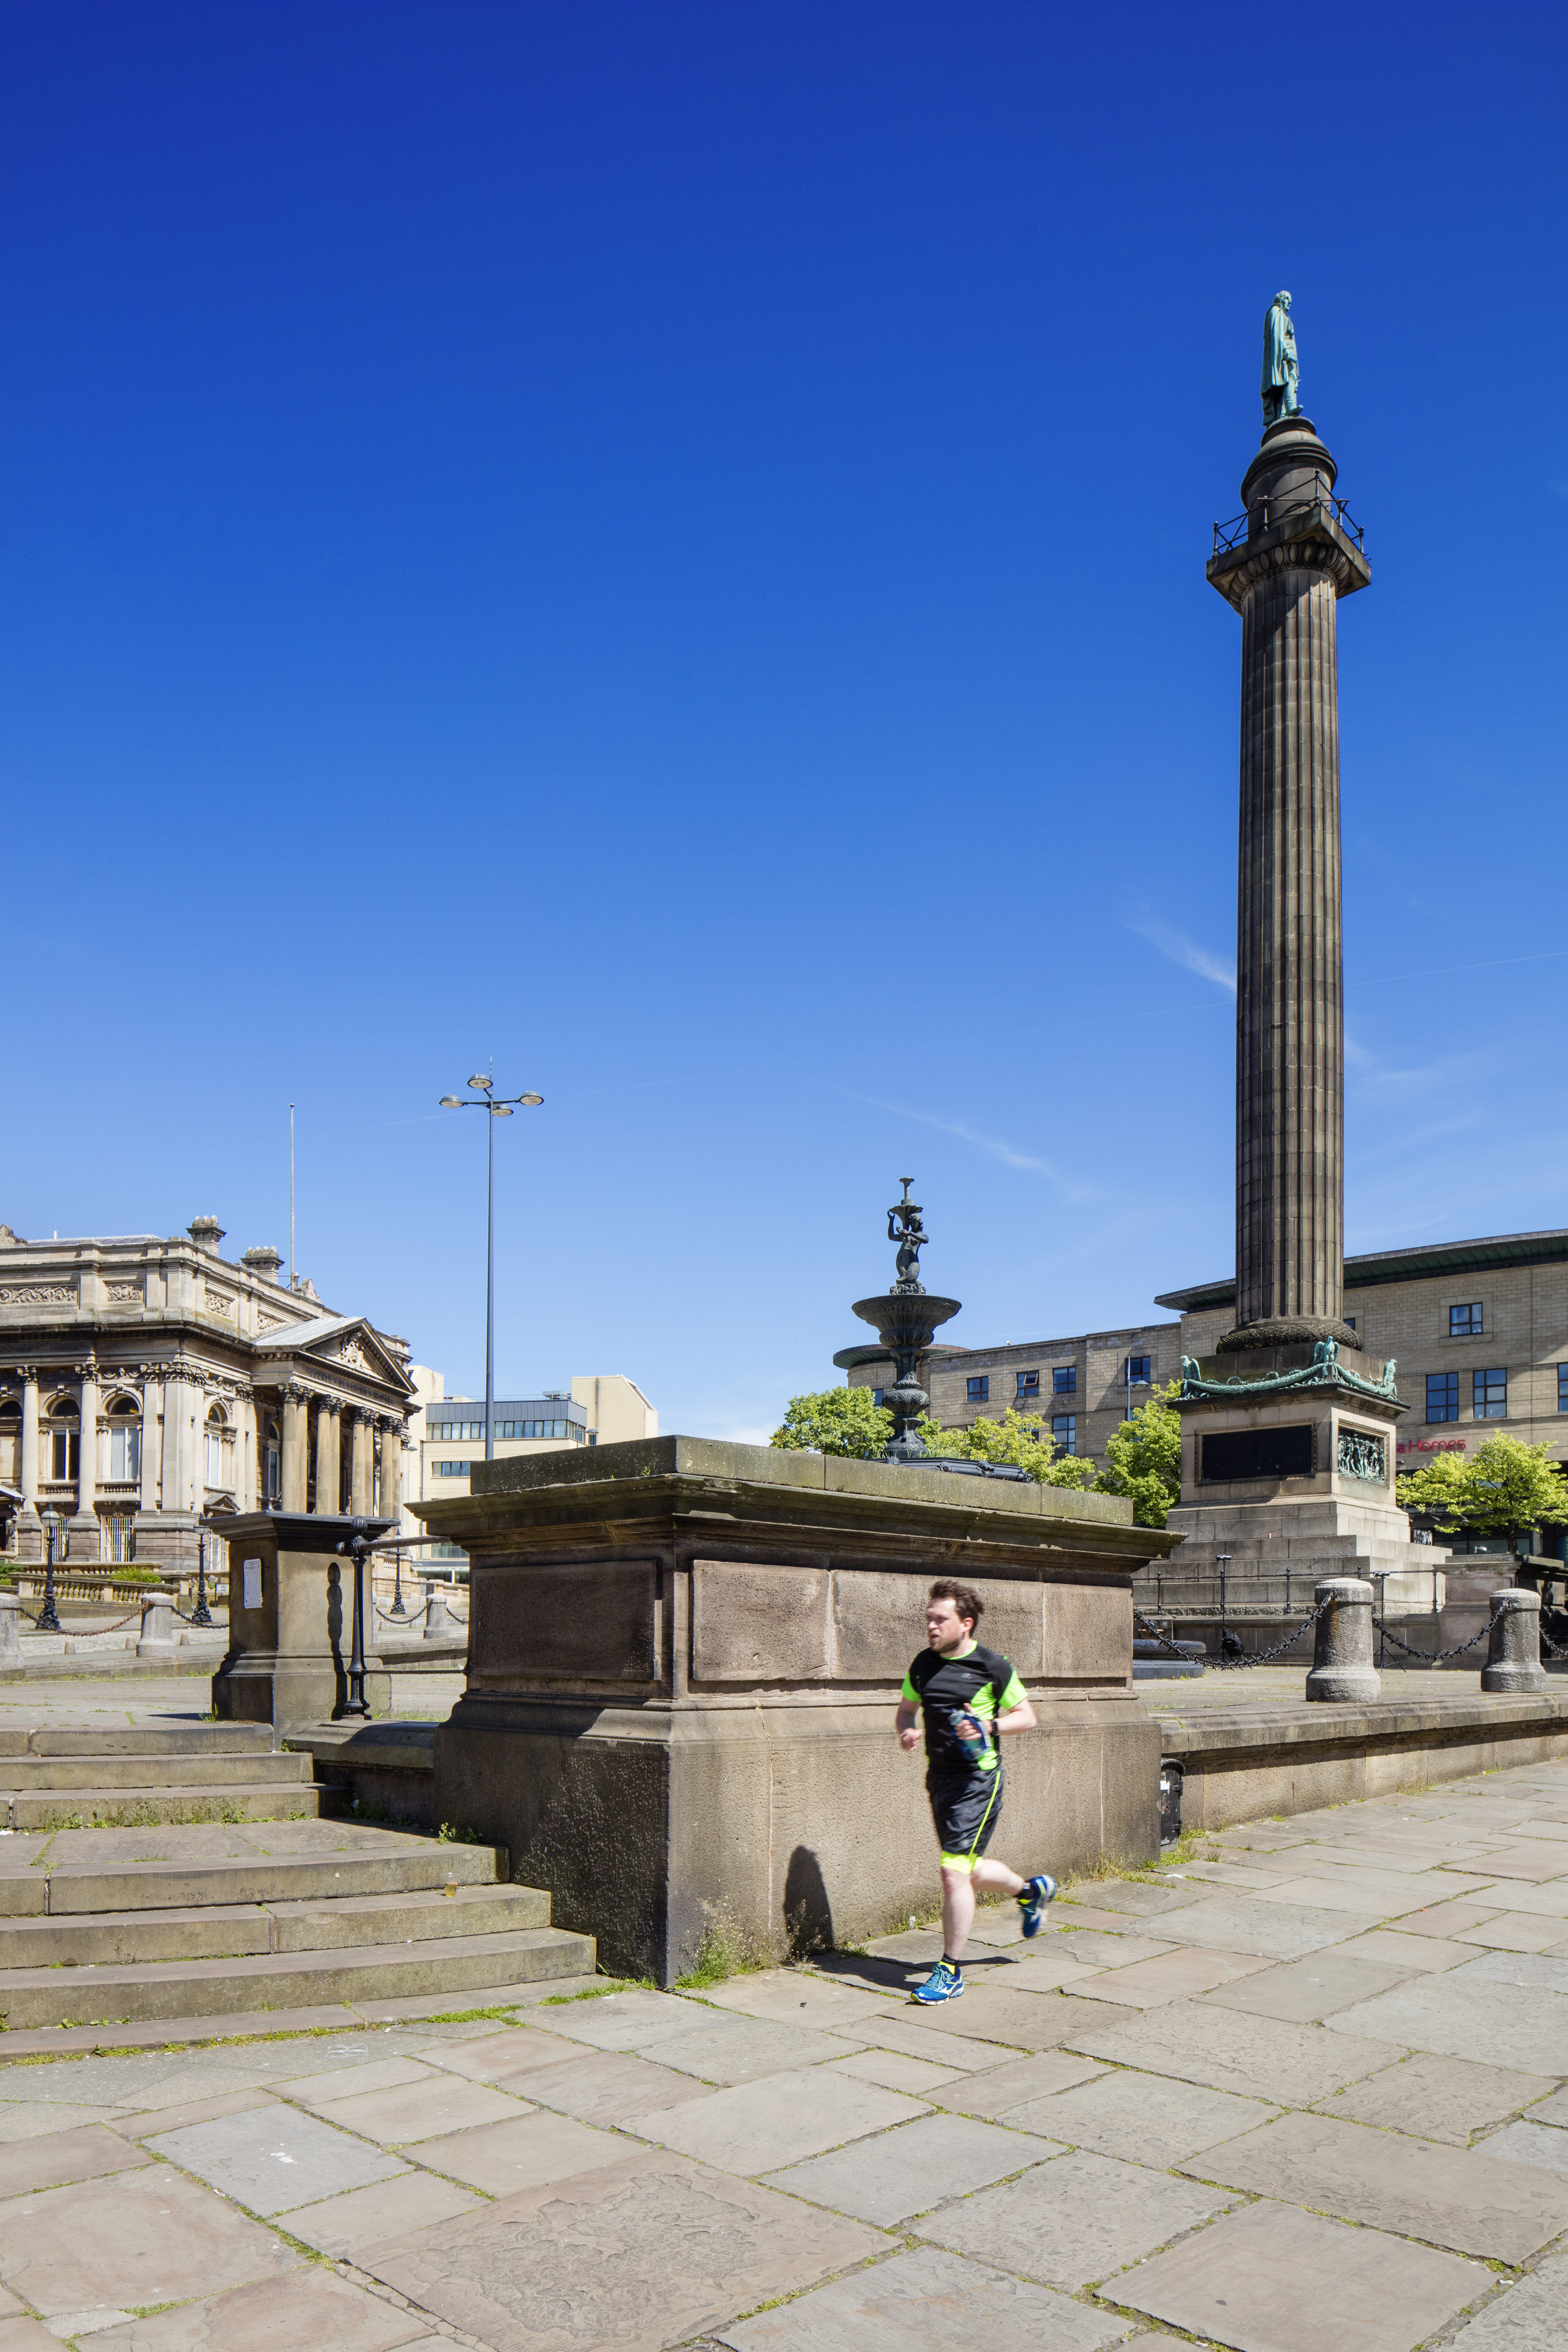 Photograph of the Wellington Column, Liverpool, with a jogger running past its base.